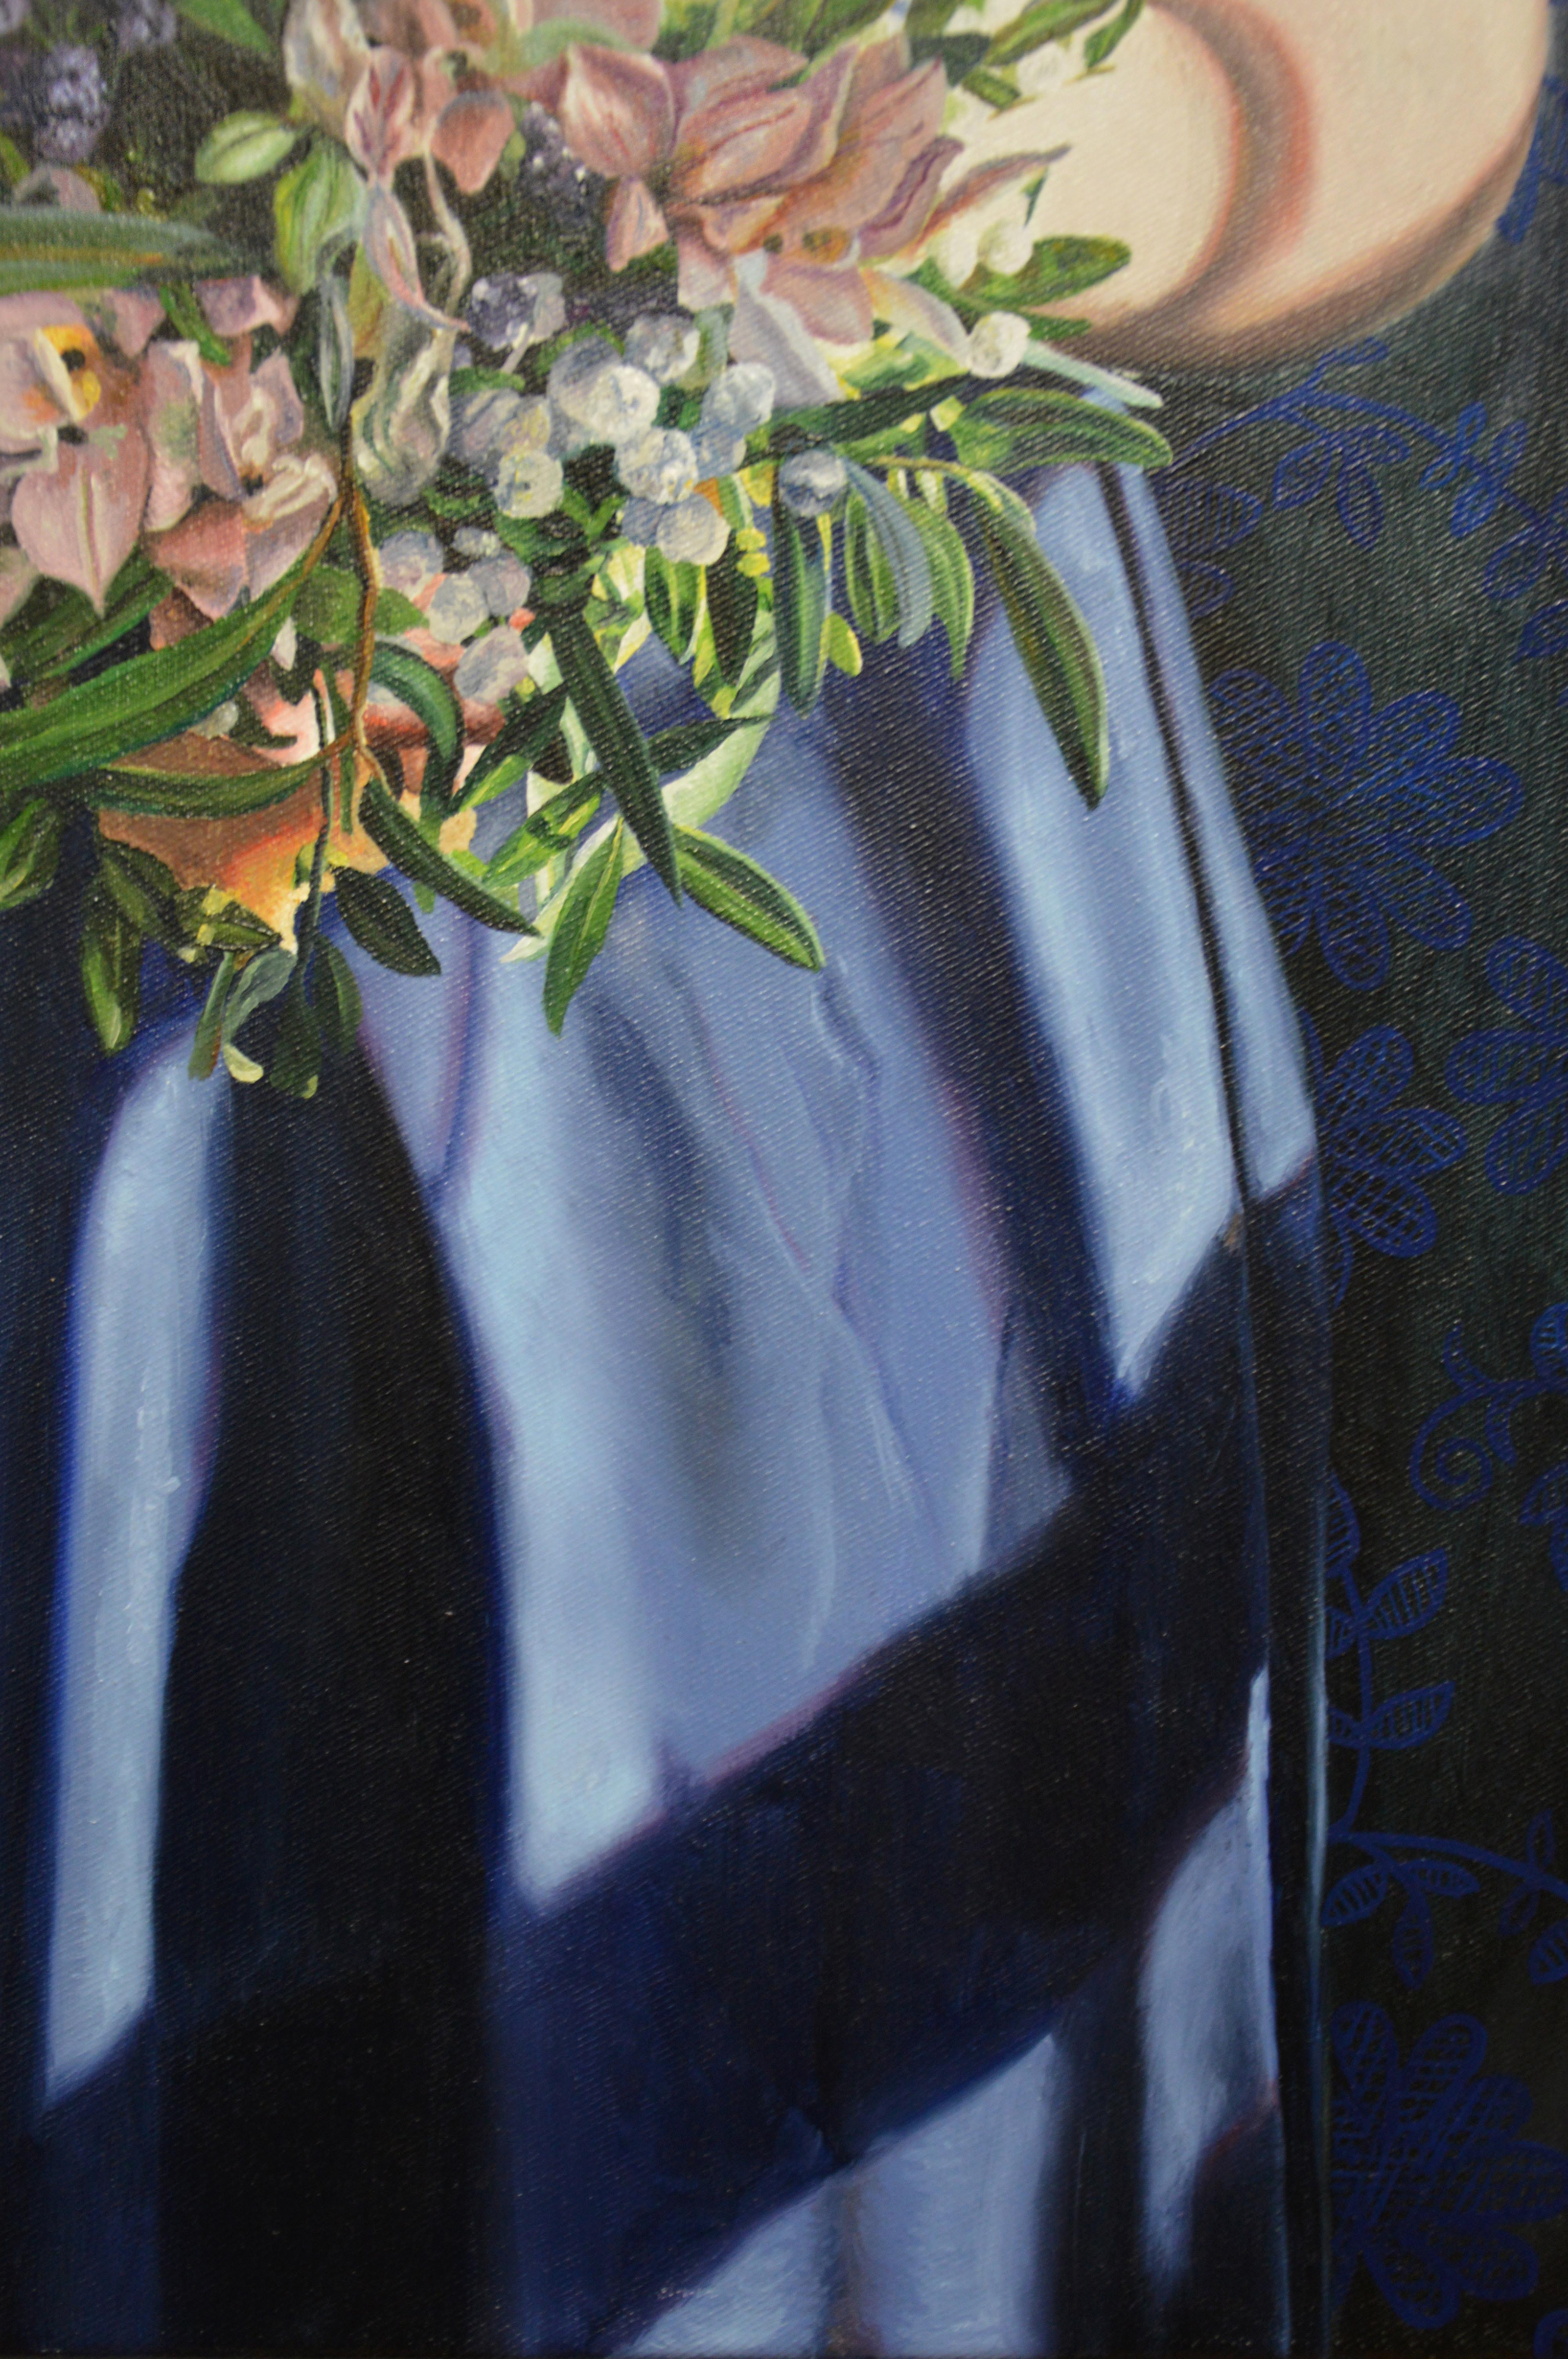 paintings, aesthetic, colorful, figurative, portraiture, bodies, botany, patterns, people, sexuality, textiles, black, blue, brown, red, white, cotton-canvas, oil, contemporary-art, danish, decorative, design, erotic, feminist, flowers, interior, interior-design, modern, modern-art, nordic, romantic, scandinavien, Buy original high quality art. Paintings, drawings, limited edition prints & posters by talented artists.